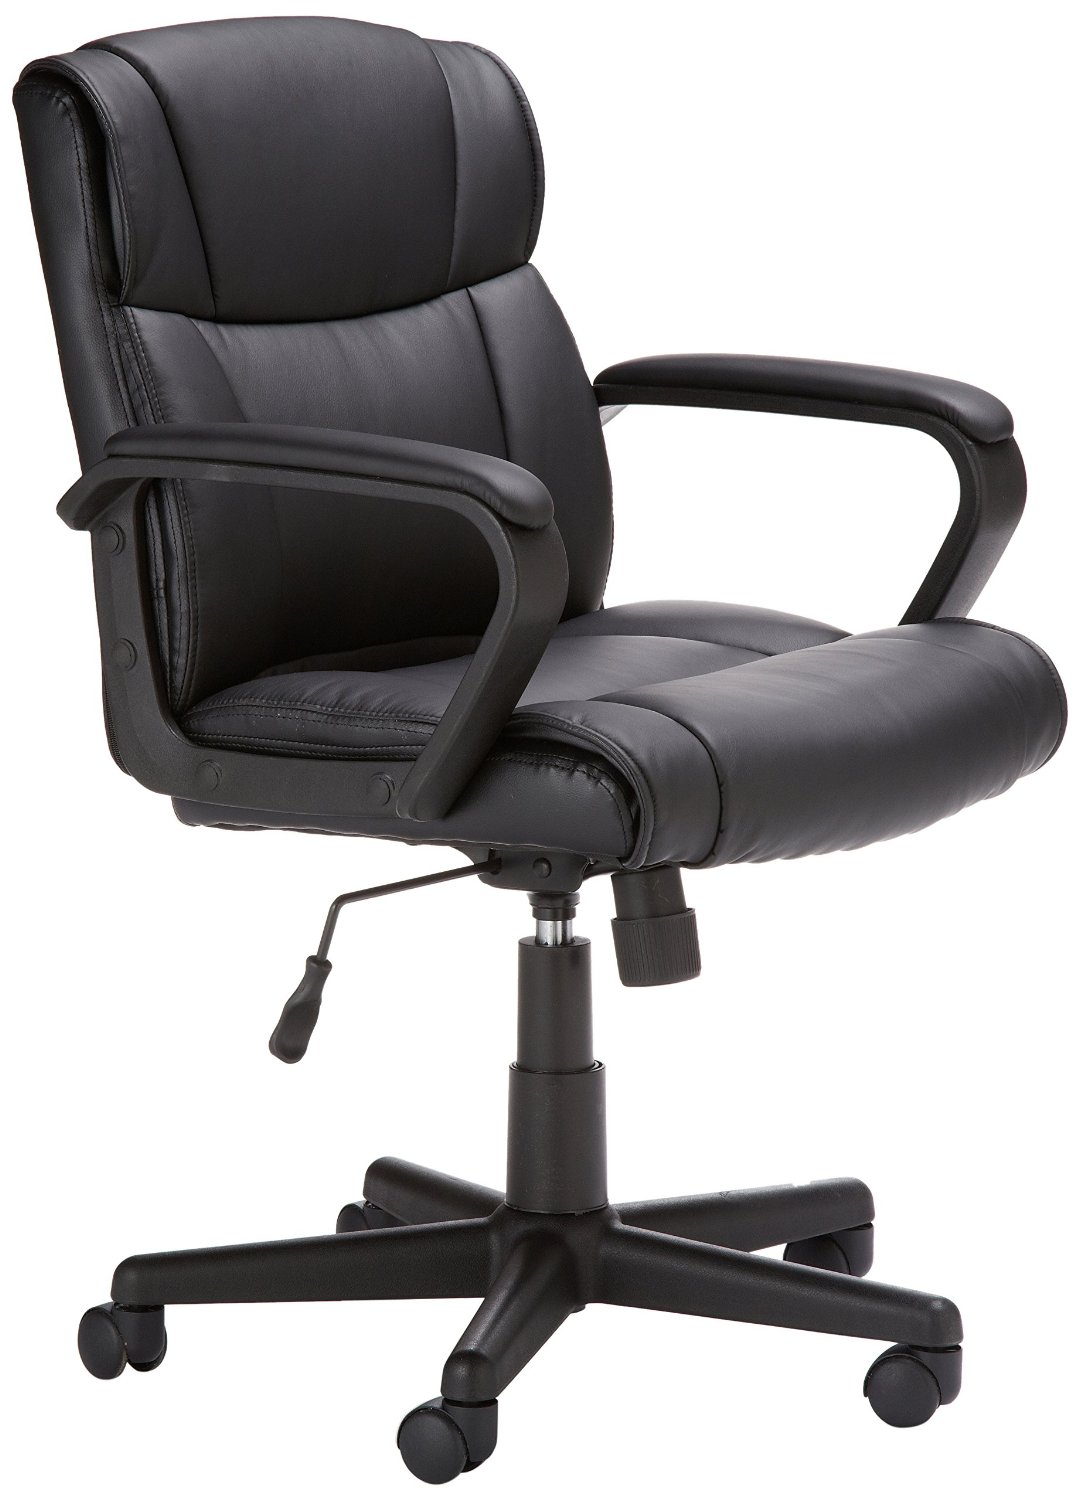 Top 10 Best Office Chairs 2017 – Top Value Reviews